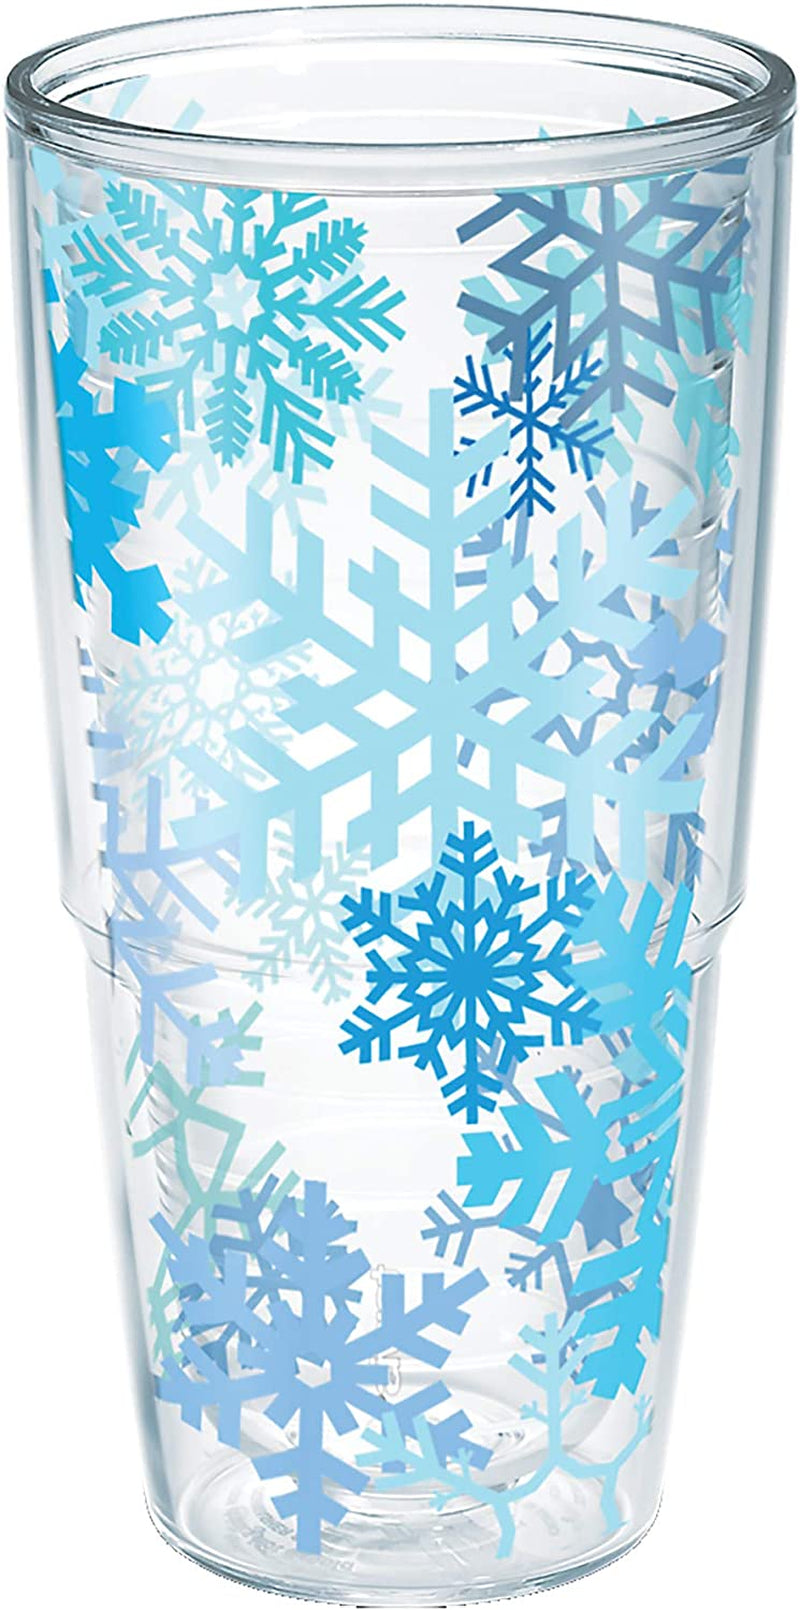 Tervis Snowflakes Tumbler with Wrap and Blue Lid 16Oz, Clear